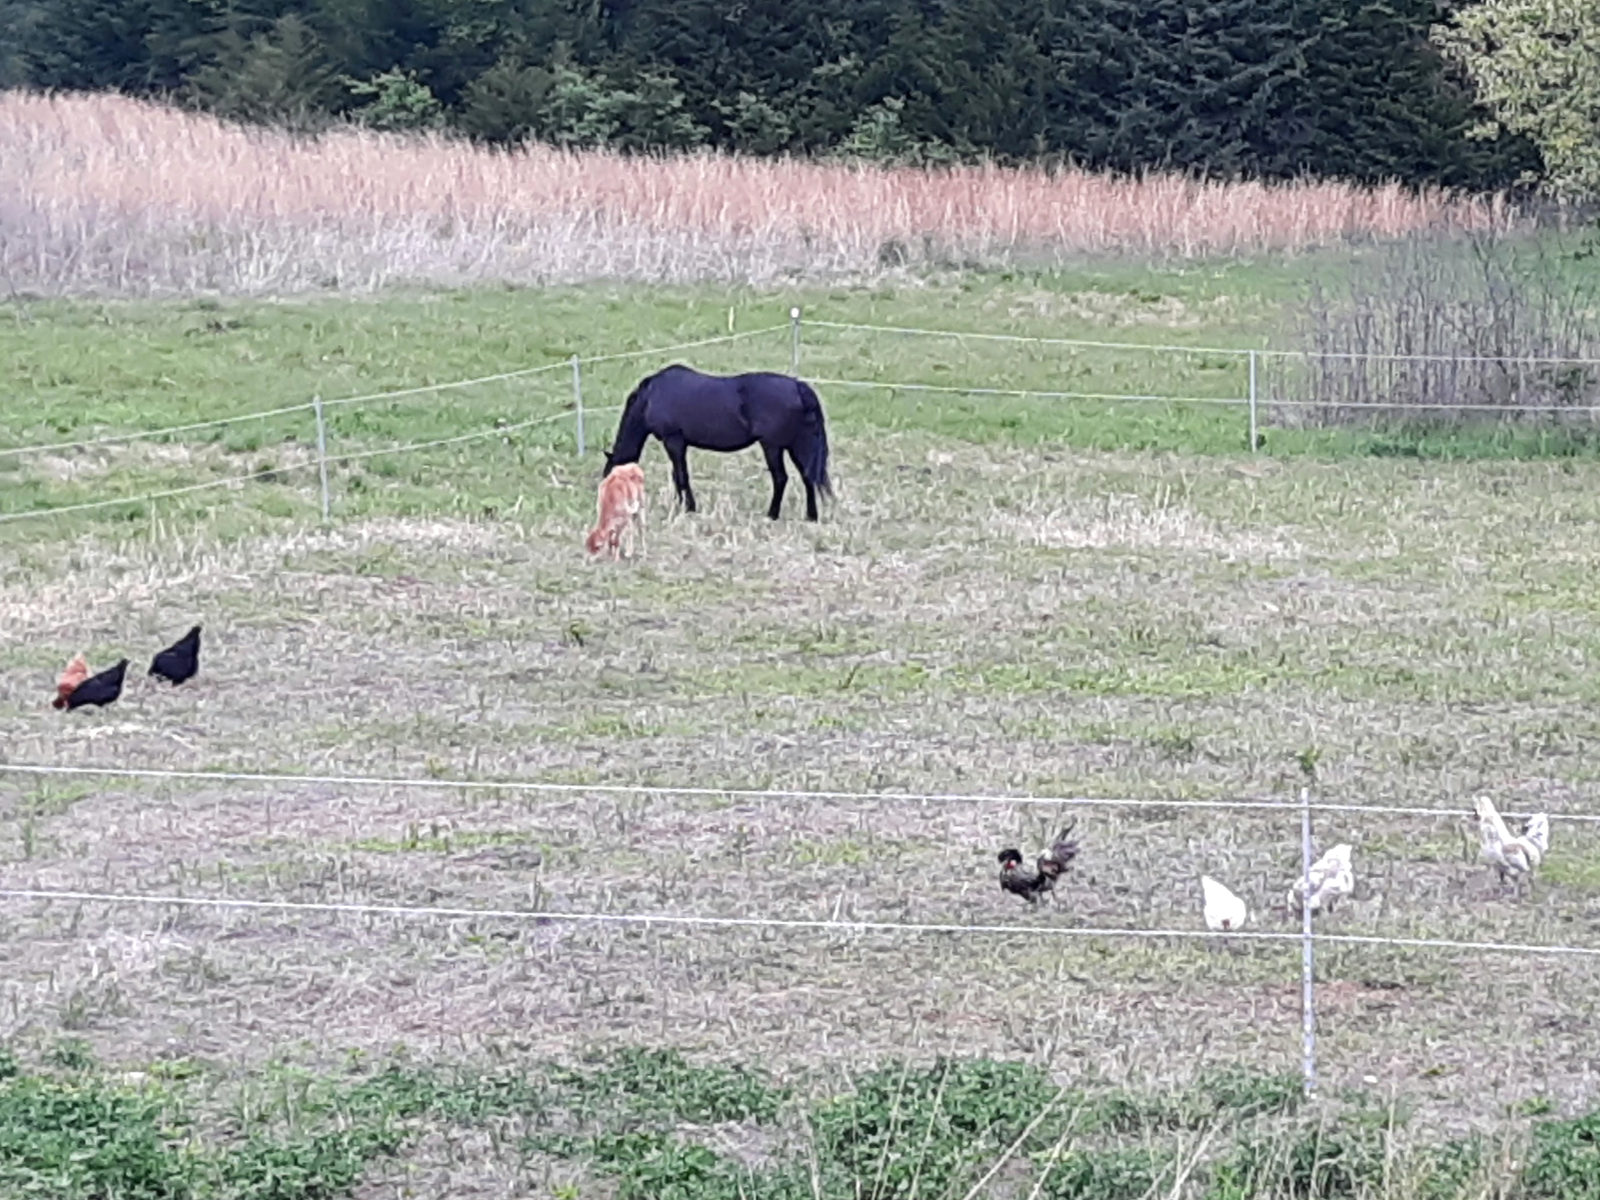 chickens free roaming with horse and calf